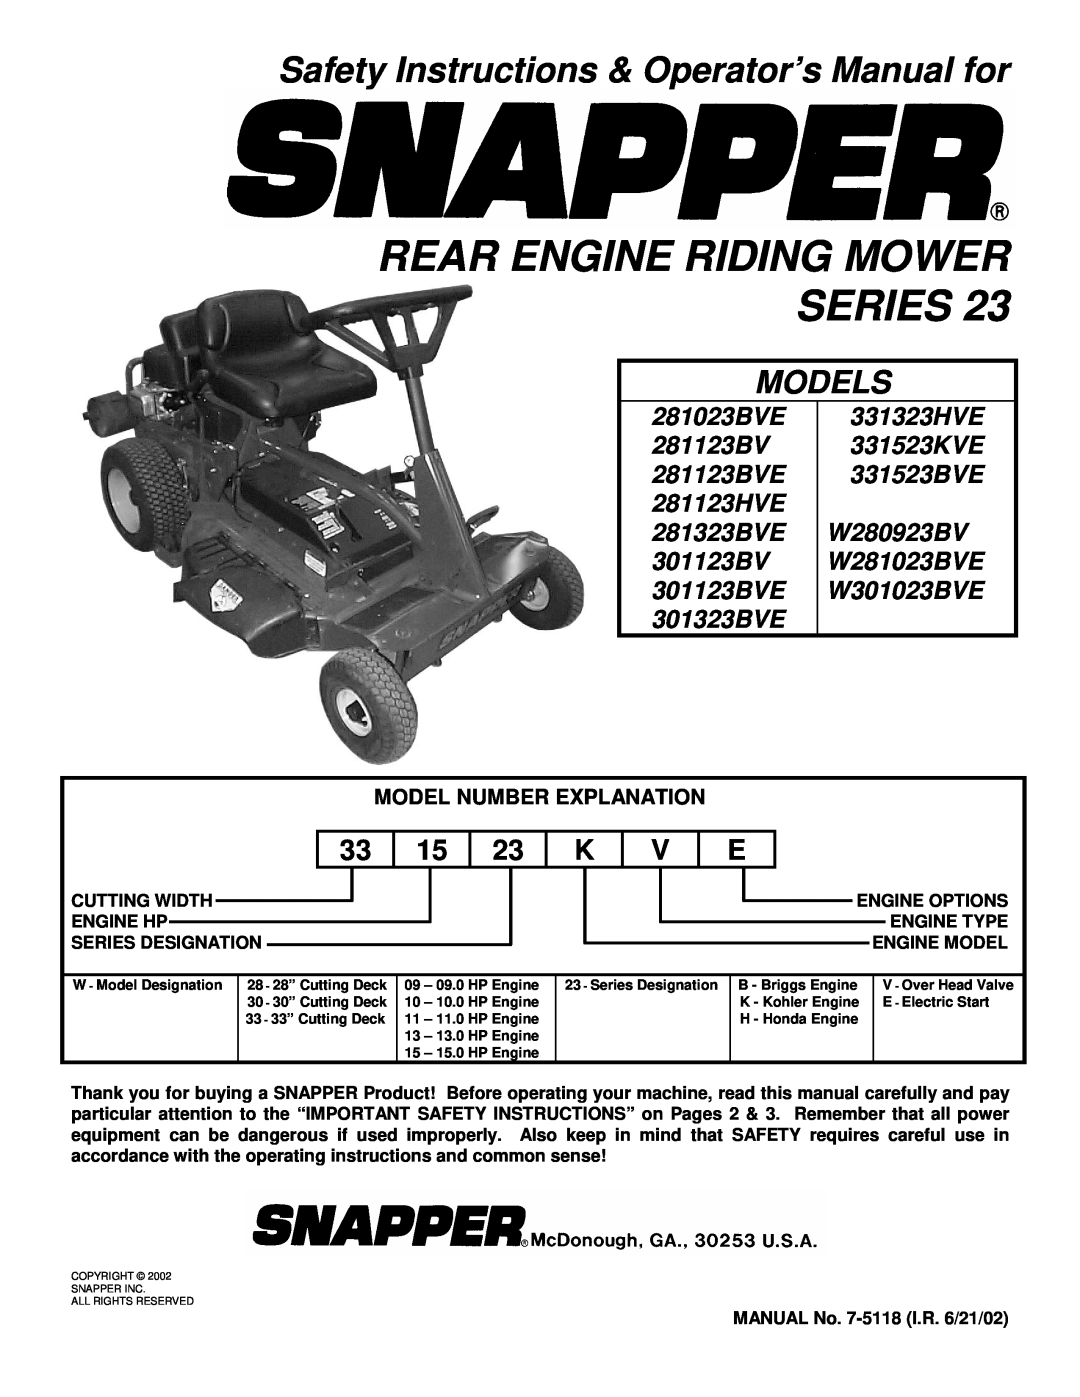 Snapper important safety instructions Safety Instructions & Operator’s Manual for, Rear Engine Riding Mower Series, Models 